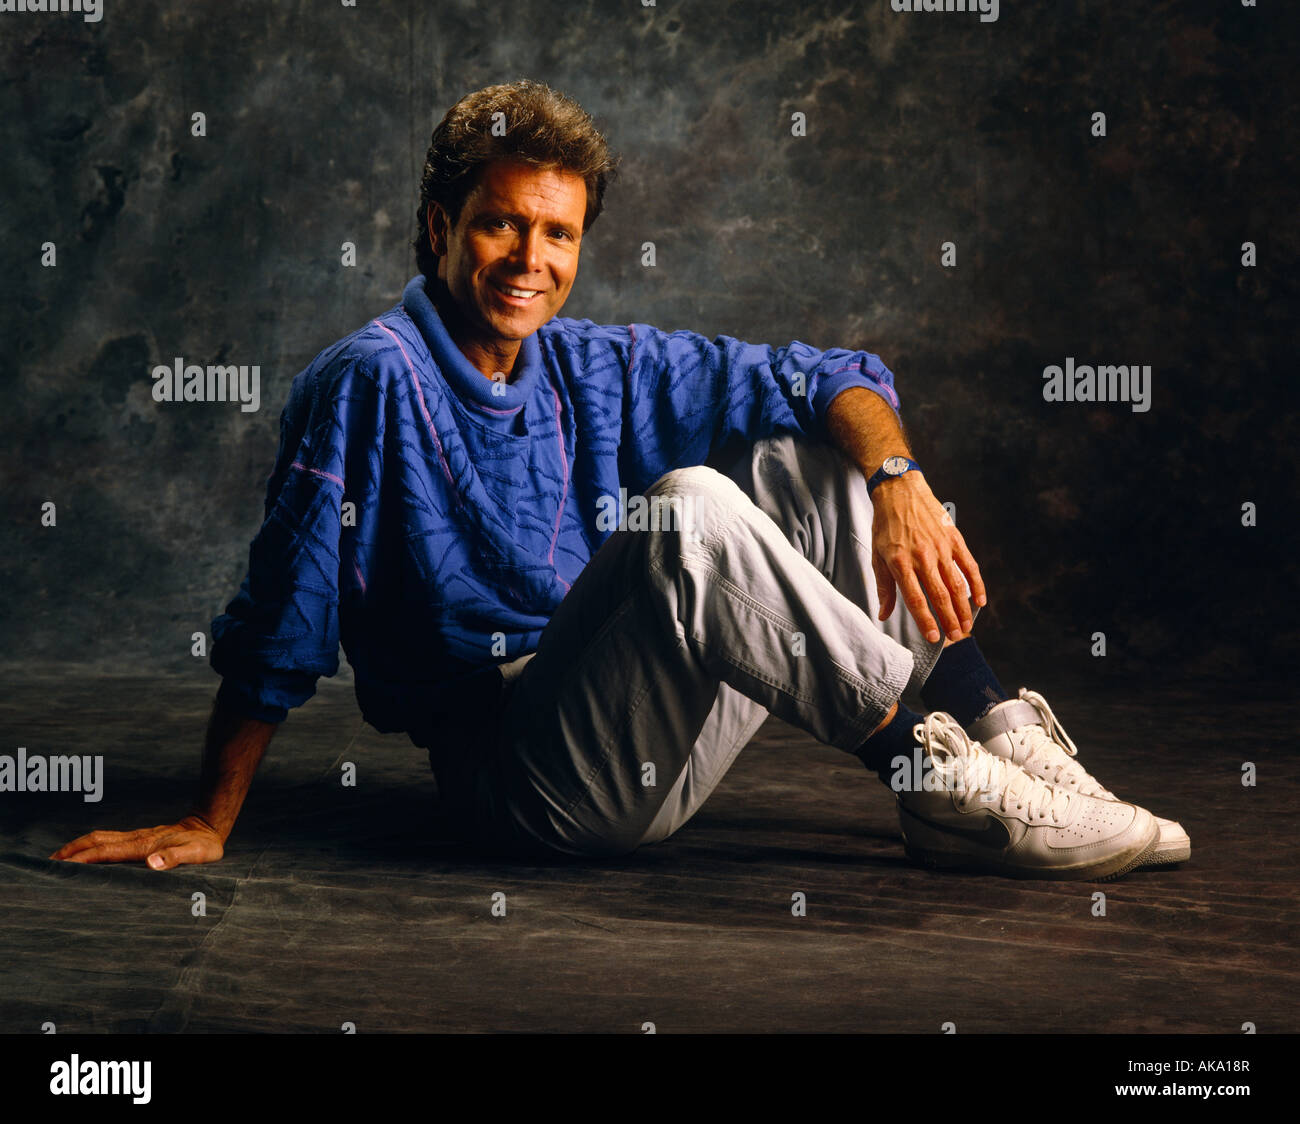 Cliff Richard High Resolution Stock Photography and Images   Alamy